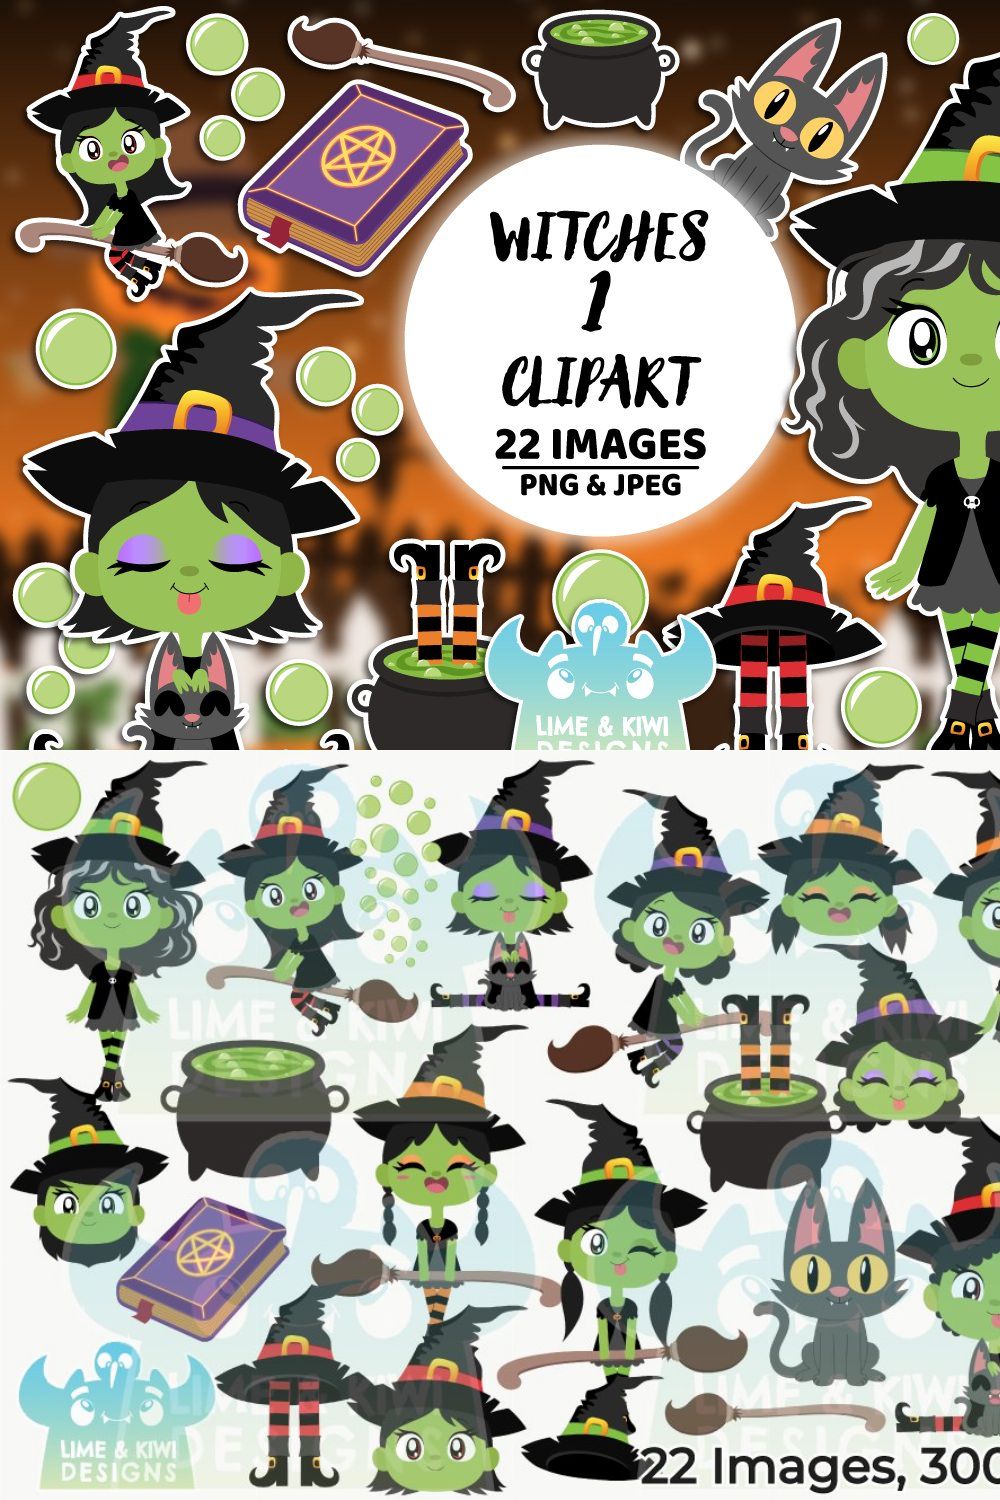 Wicked Witches 1 Clipart pinterest preview image.